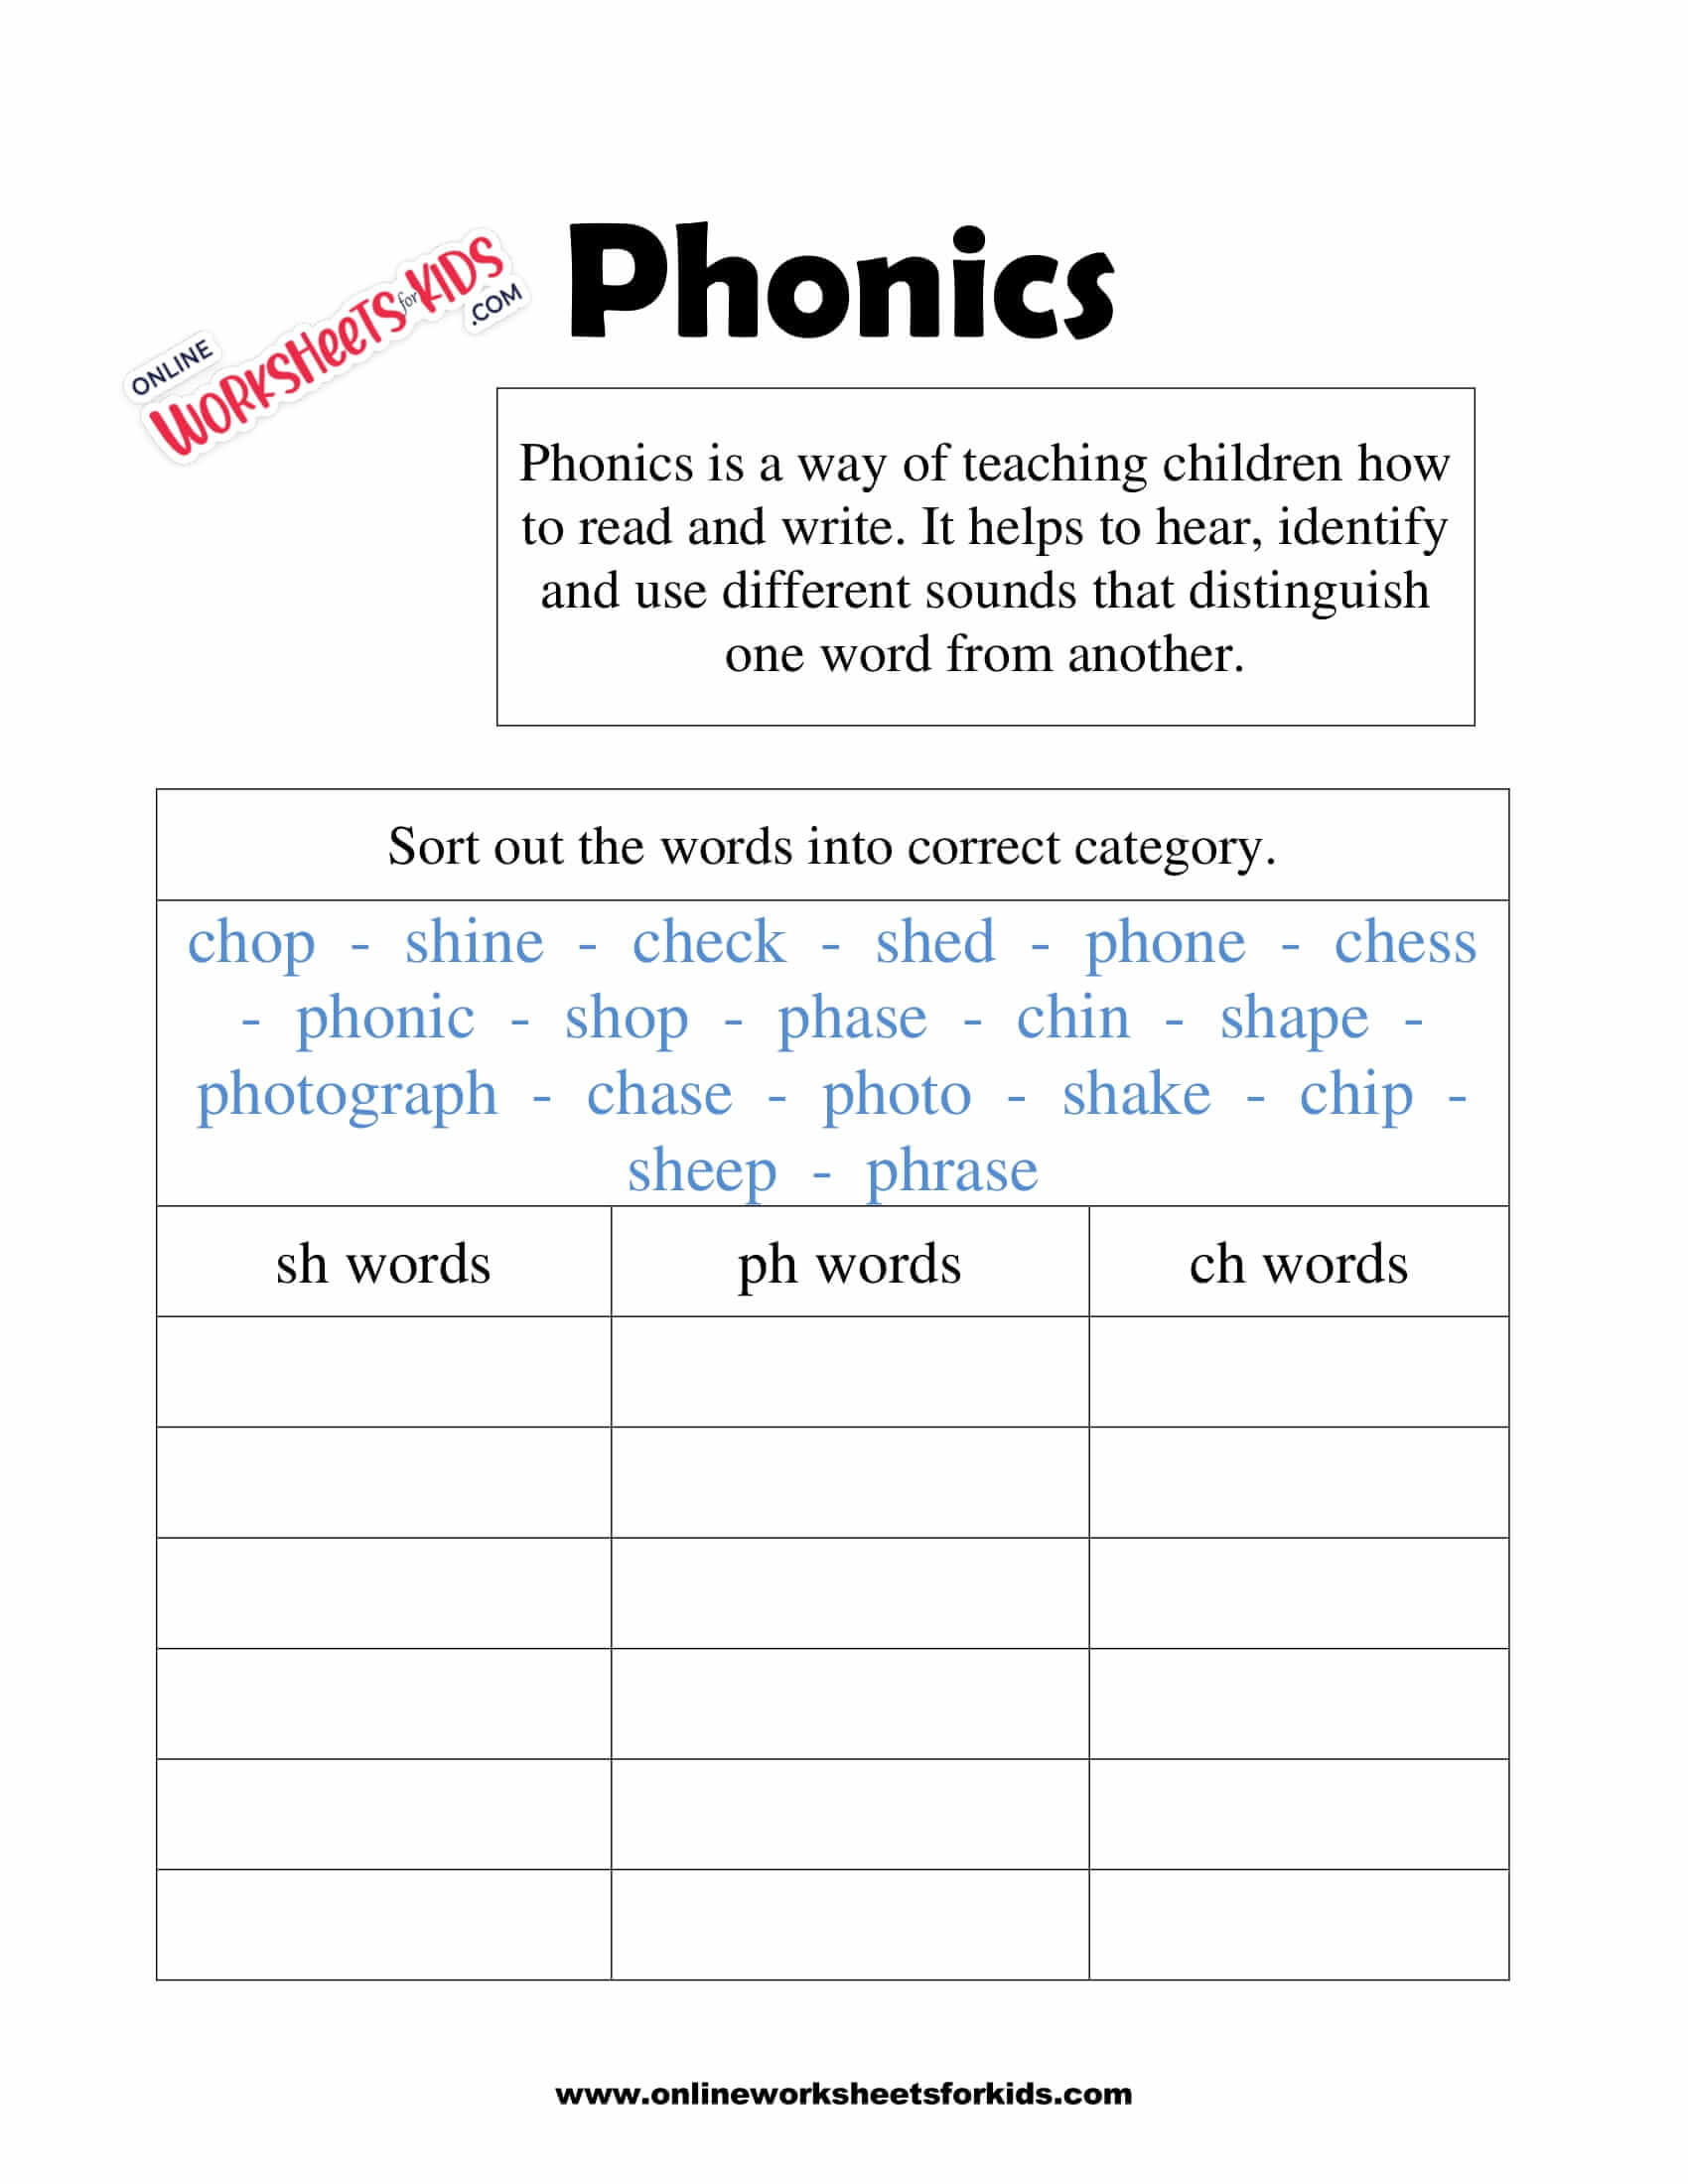 free-phonics-worksheets-and-printable-for-kids